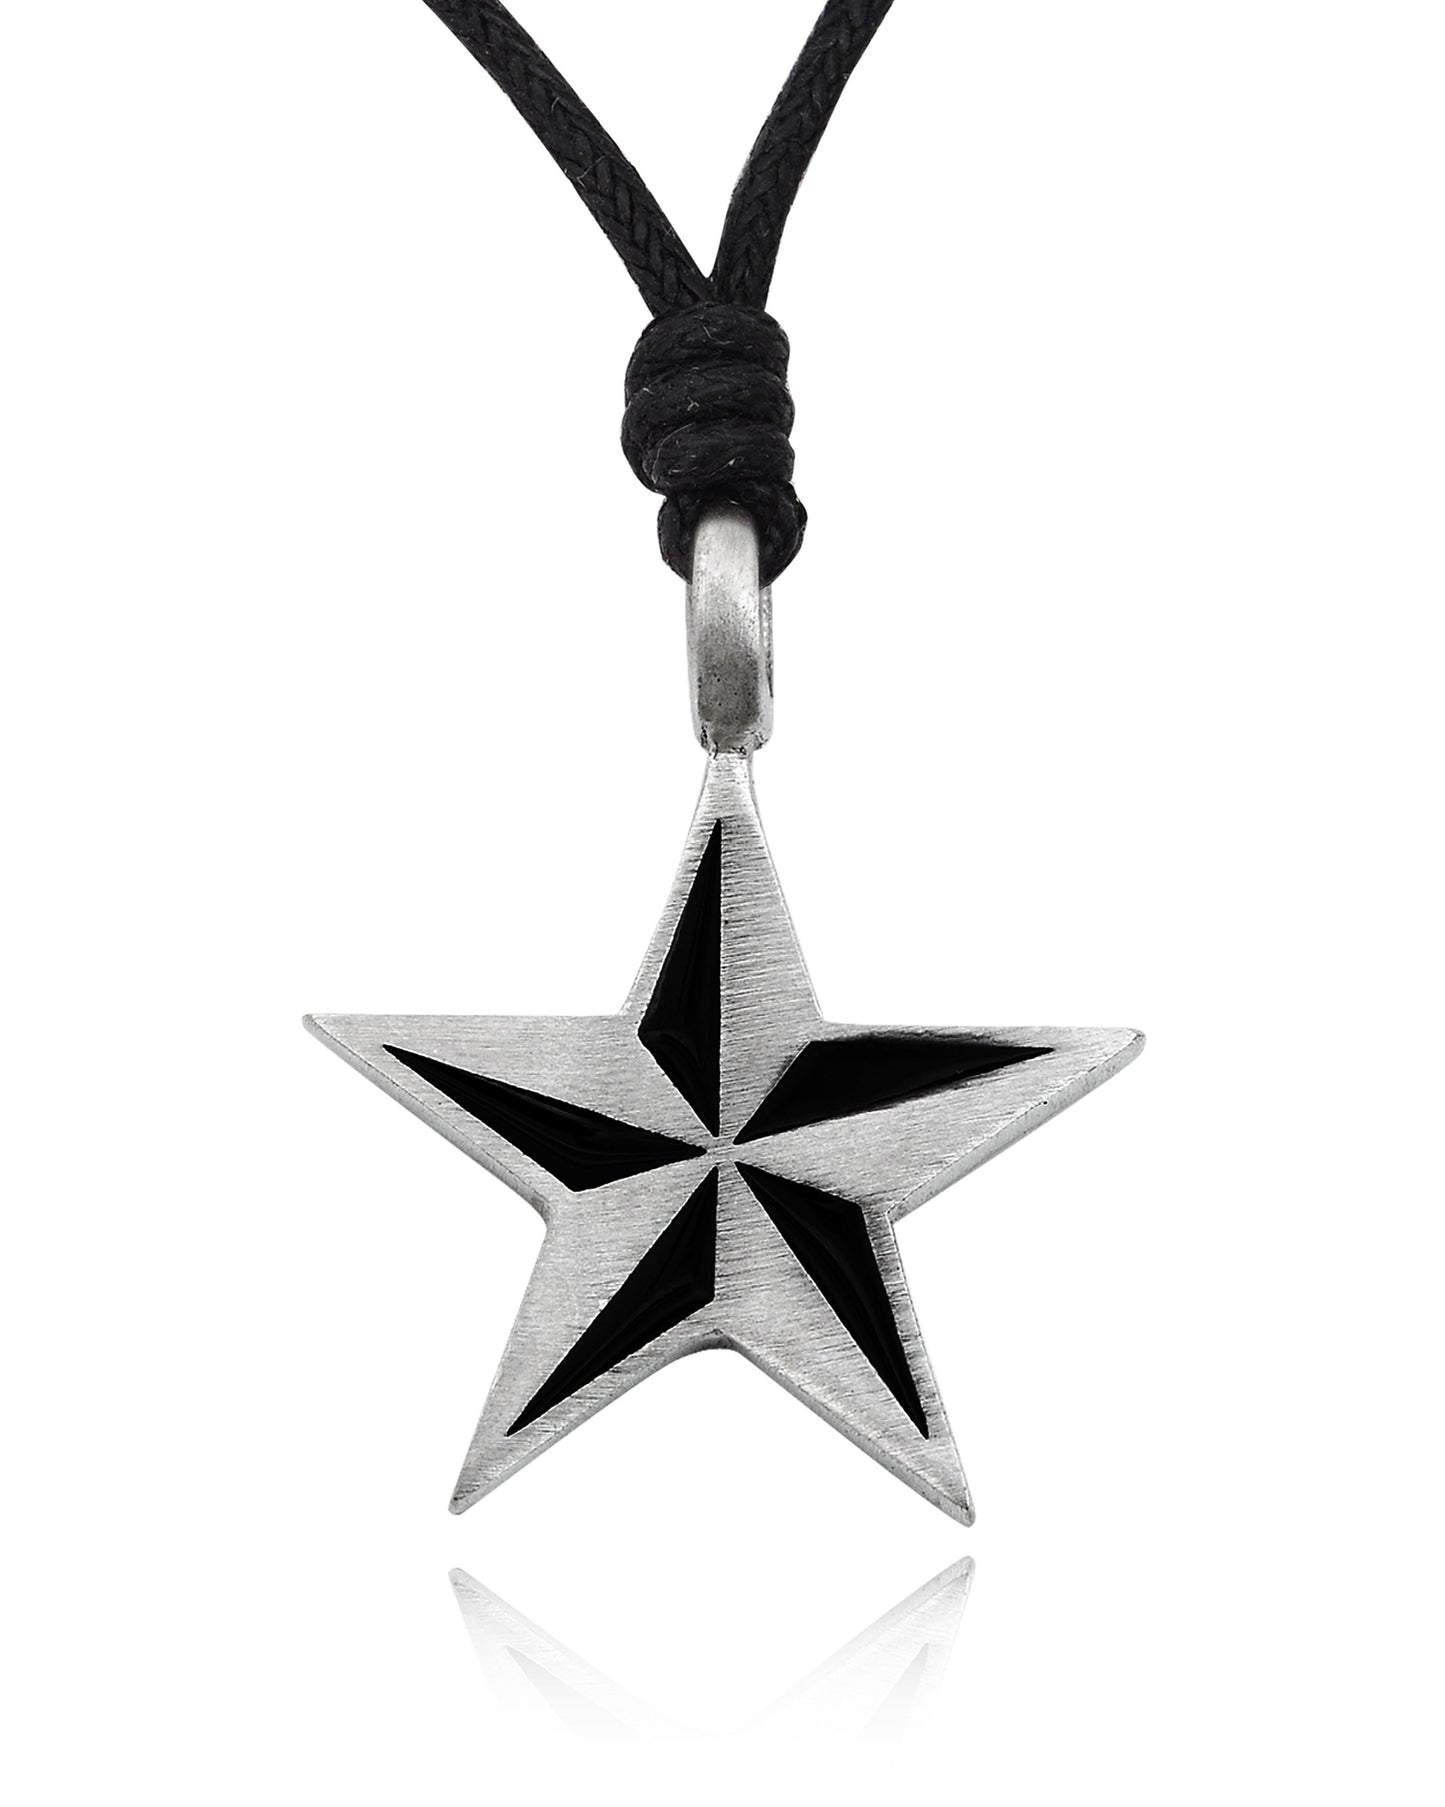 New 5-Pointed Star Silver Pewter Charm Necklace Pendant Jewelry